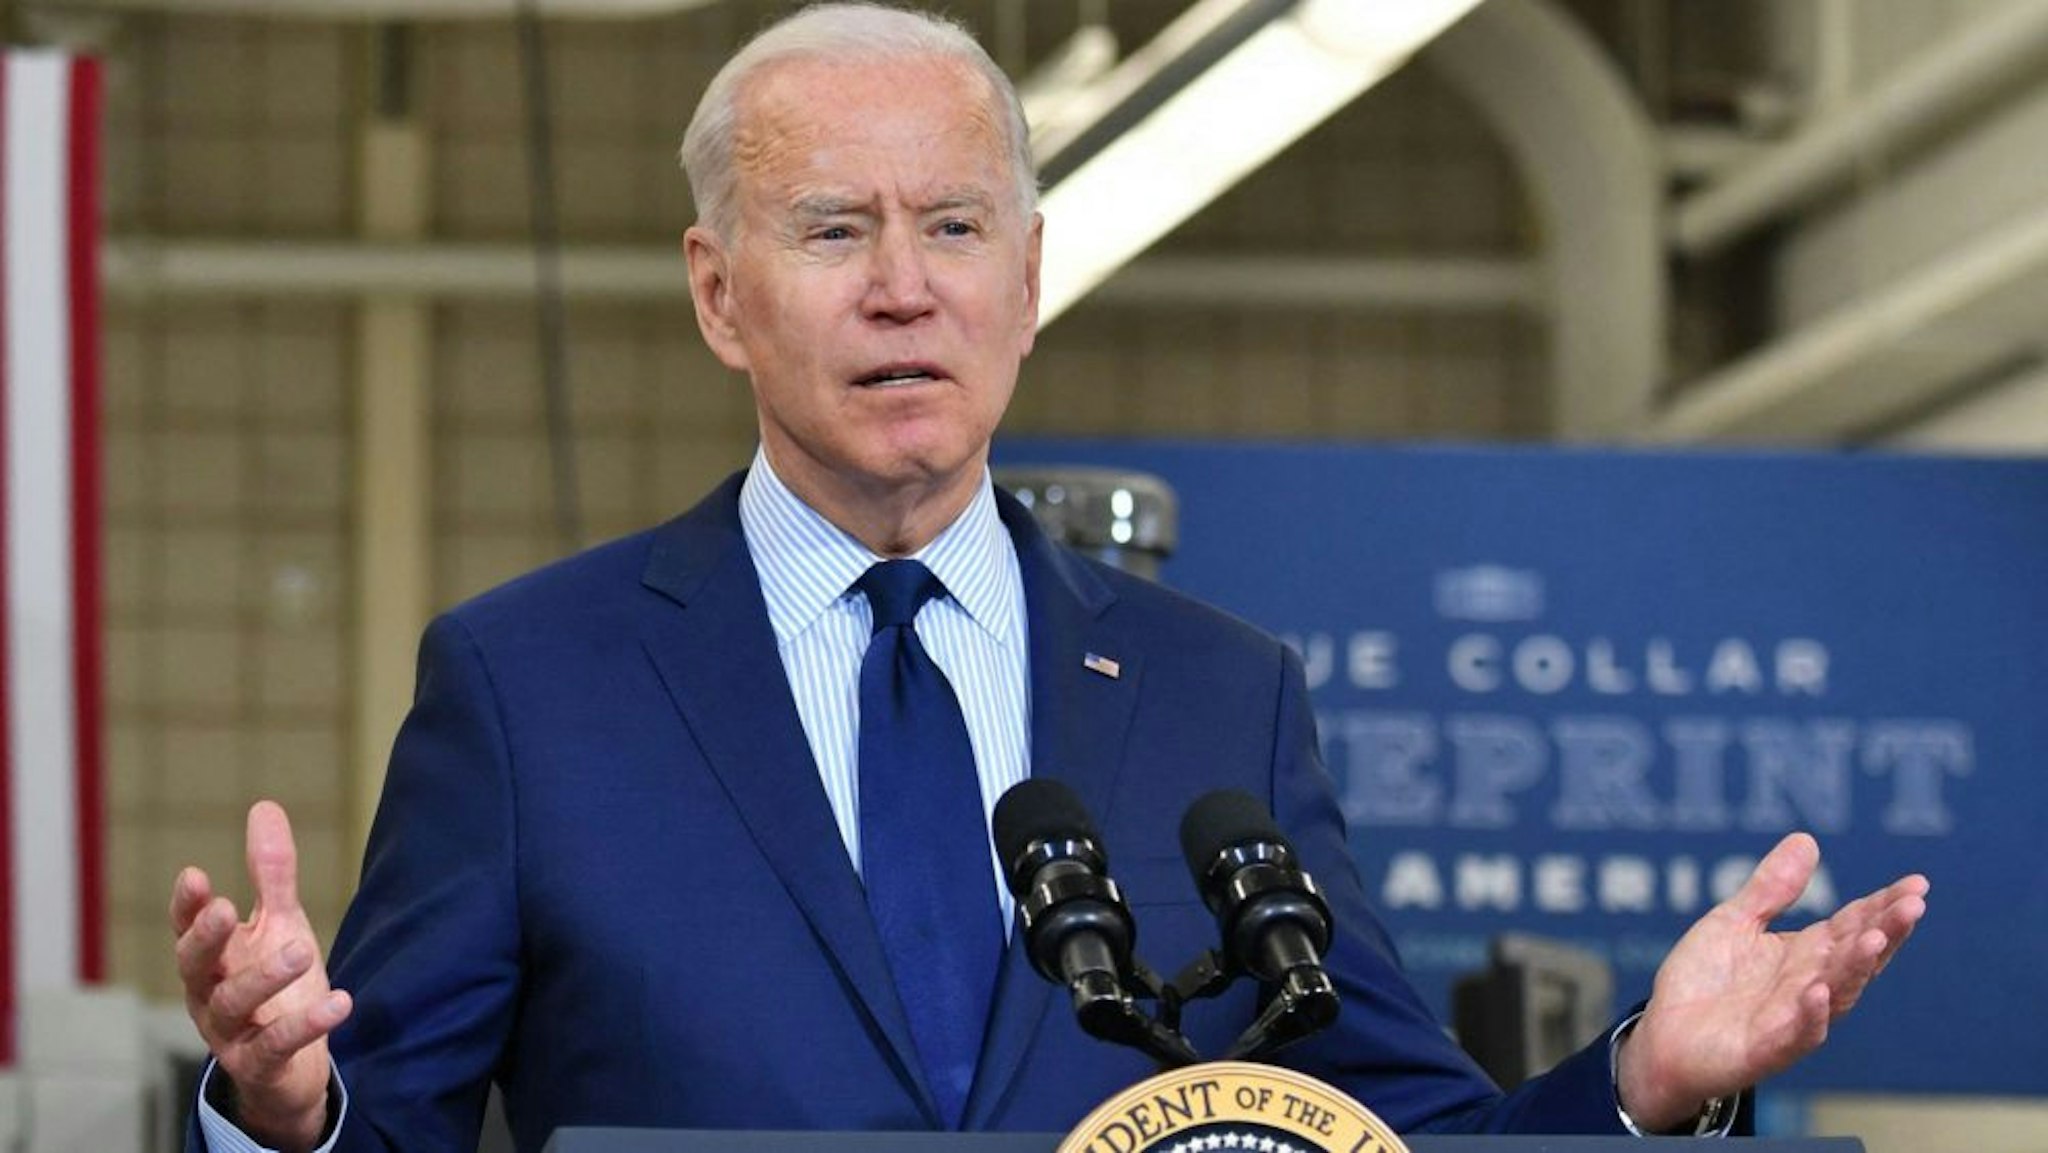 US President Joe Biden speaks on the economy at Cuyahoga Community College Manufacturing Technology Center, on May 27, 2021, in Cleveland, Ohio.